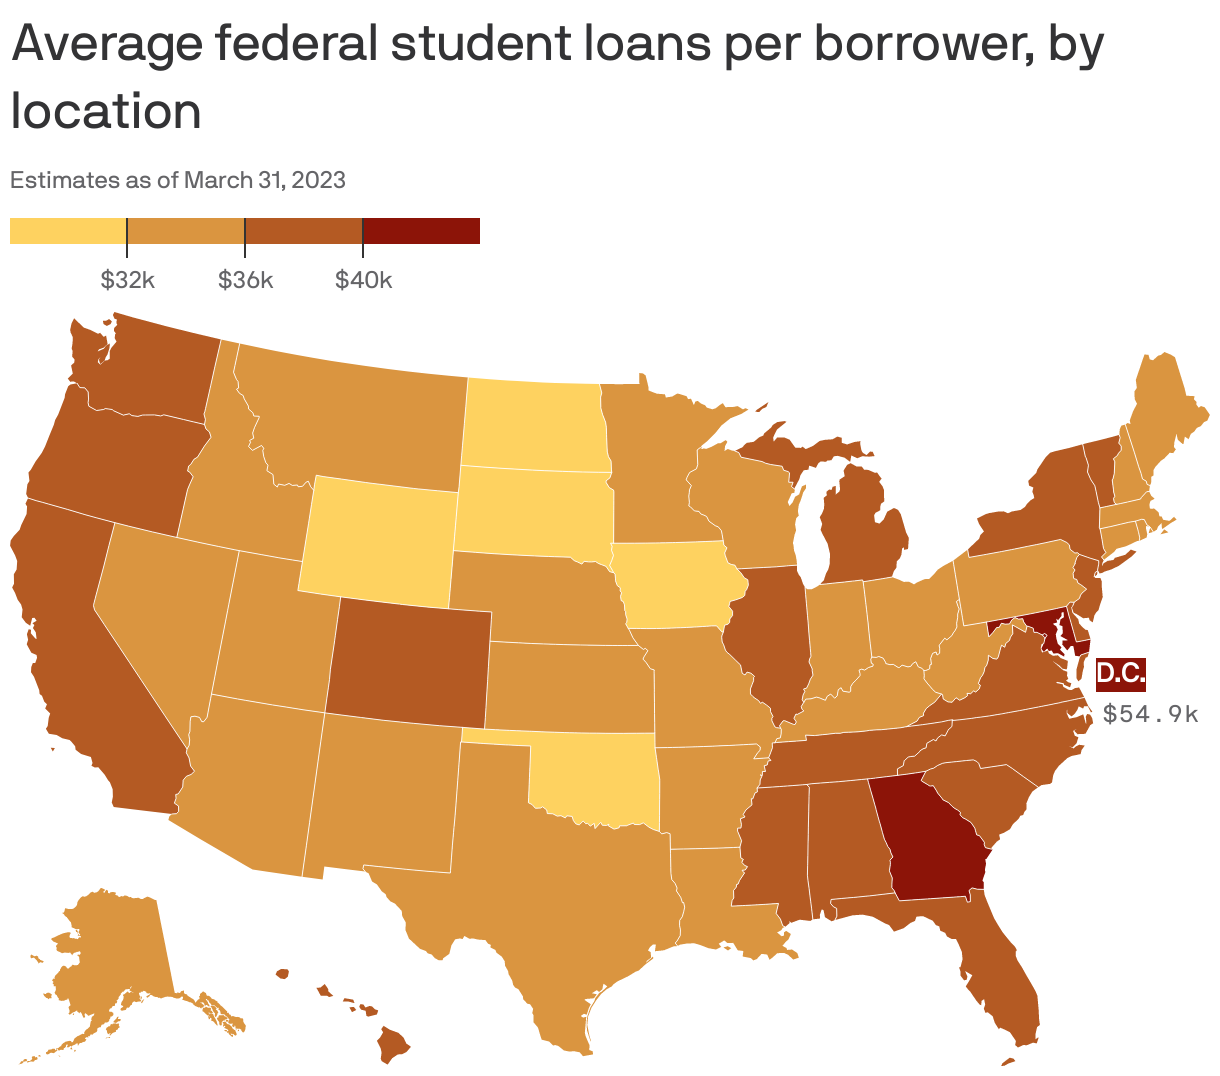 Average federal student loans per borrower, by location